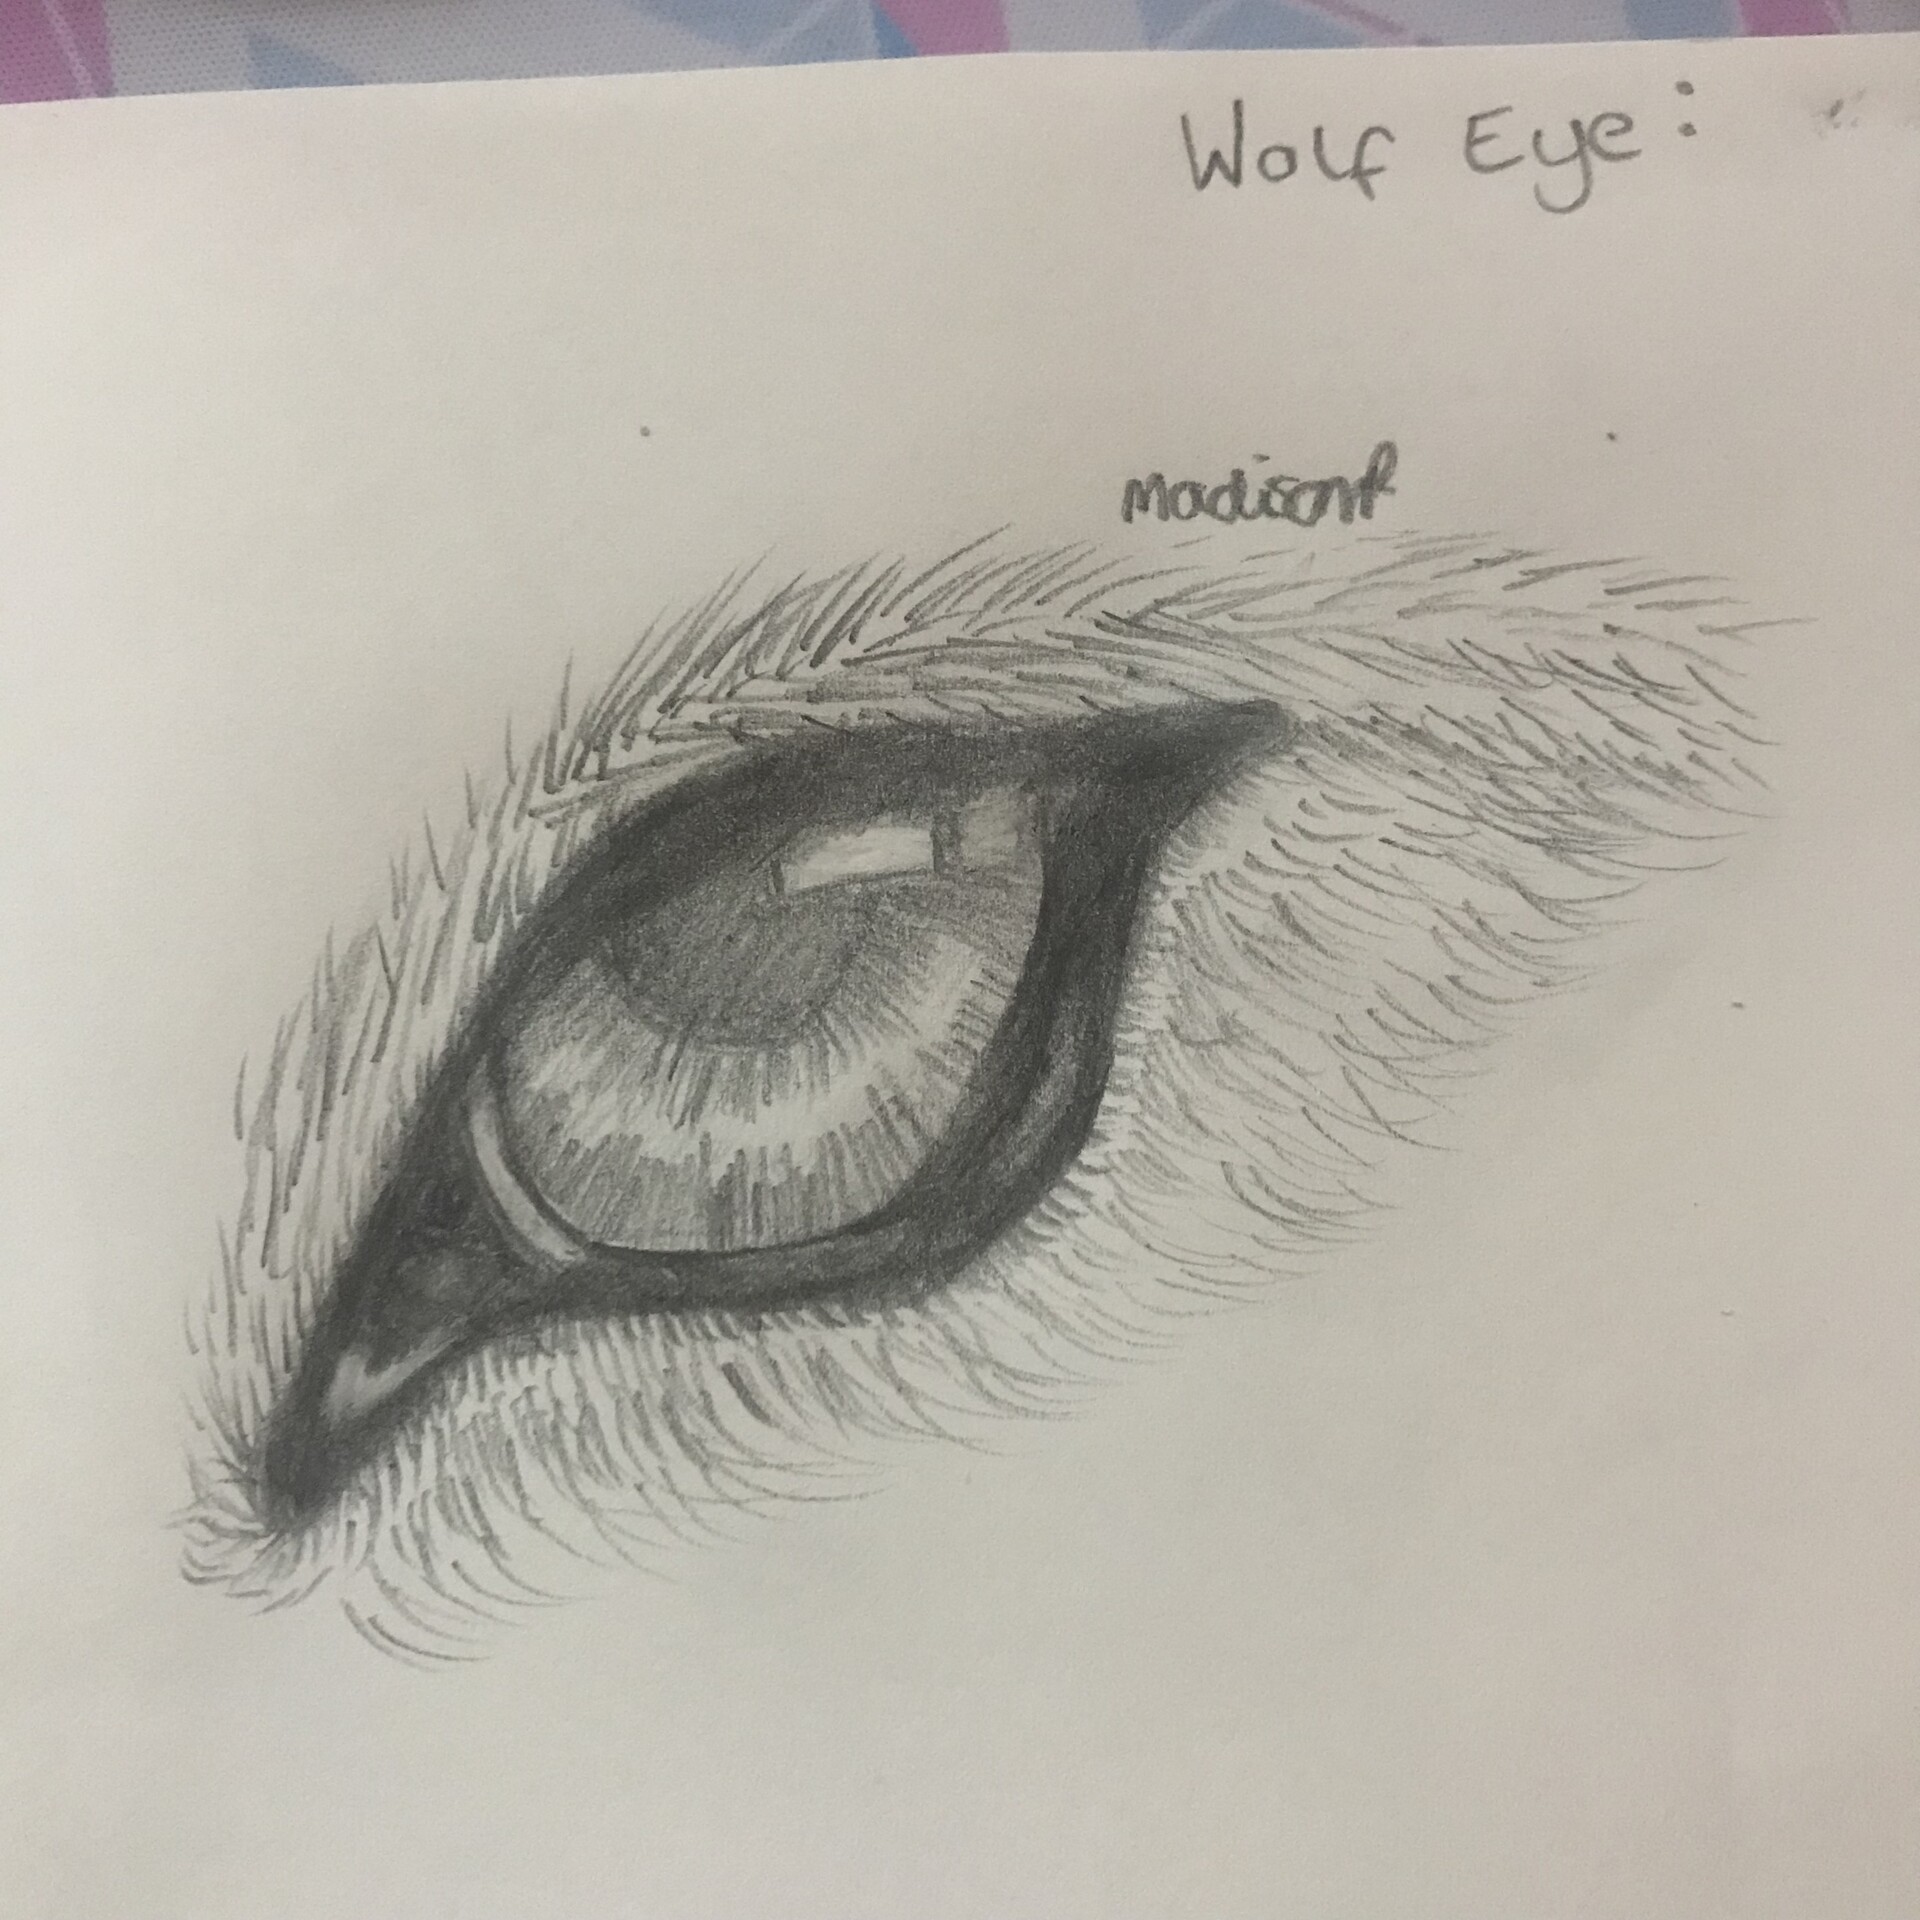 How To Draw A Wolf Eye Step By Step